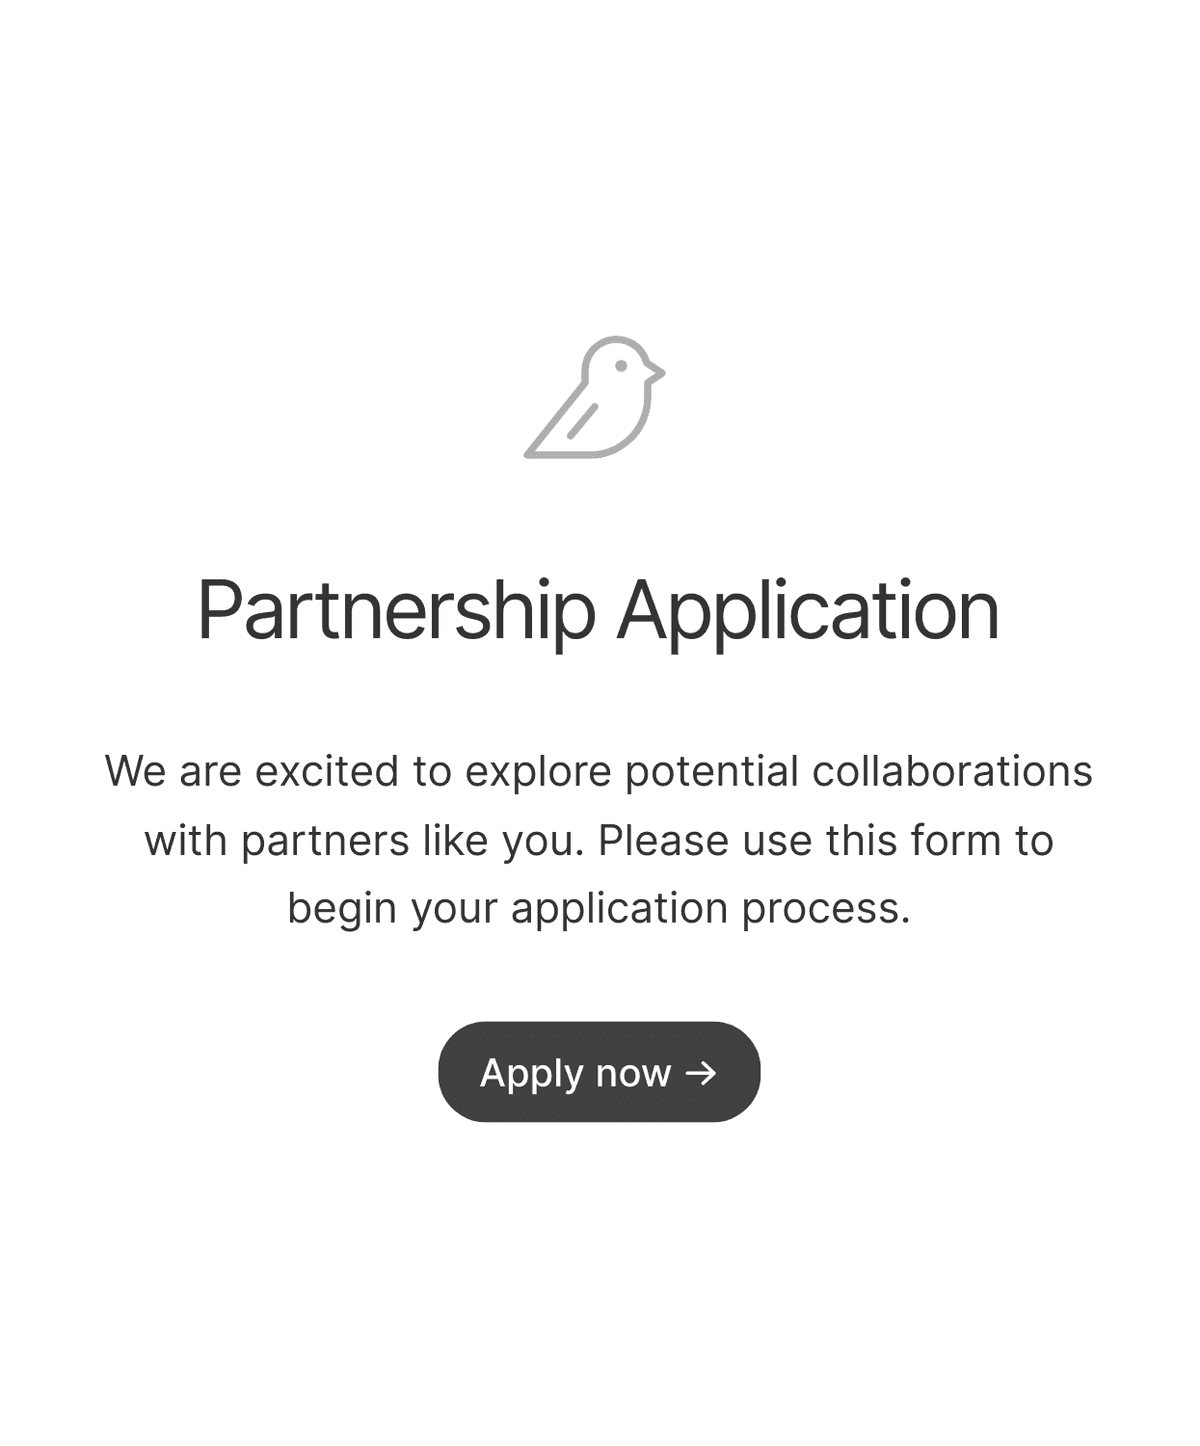 Welcome step of 'Partnership application form' with an illustration, introduction text, and a 'Apply now' button